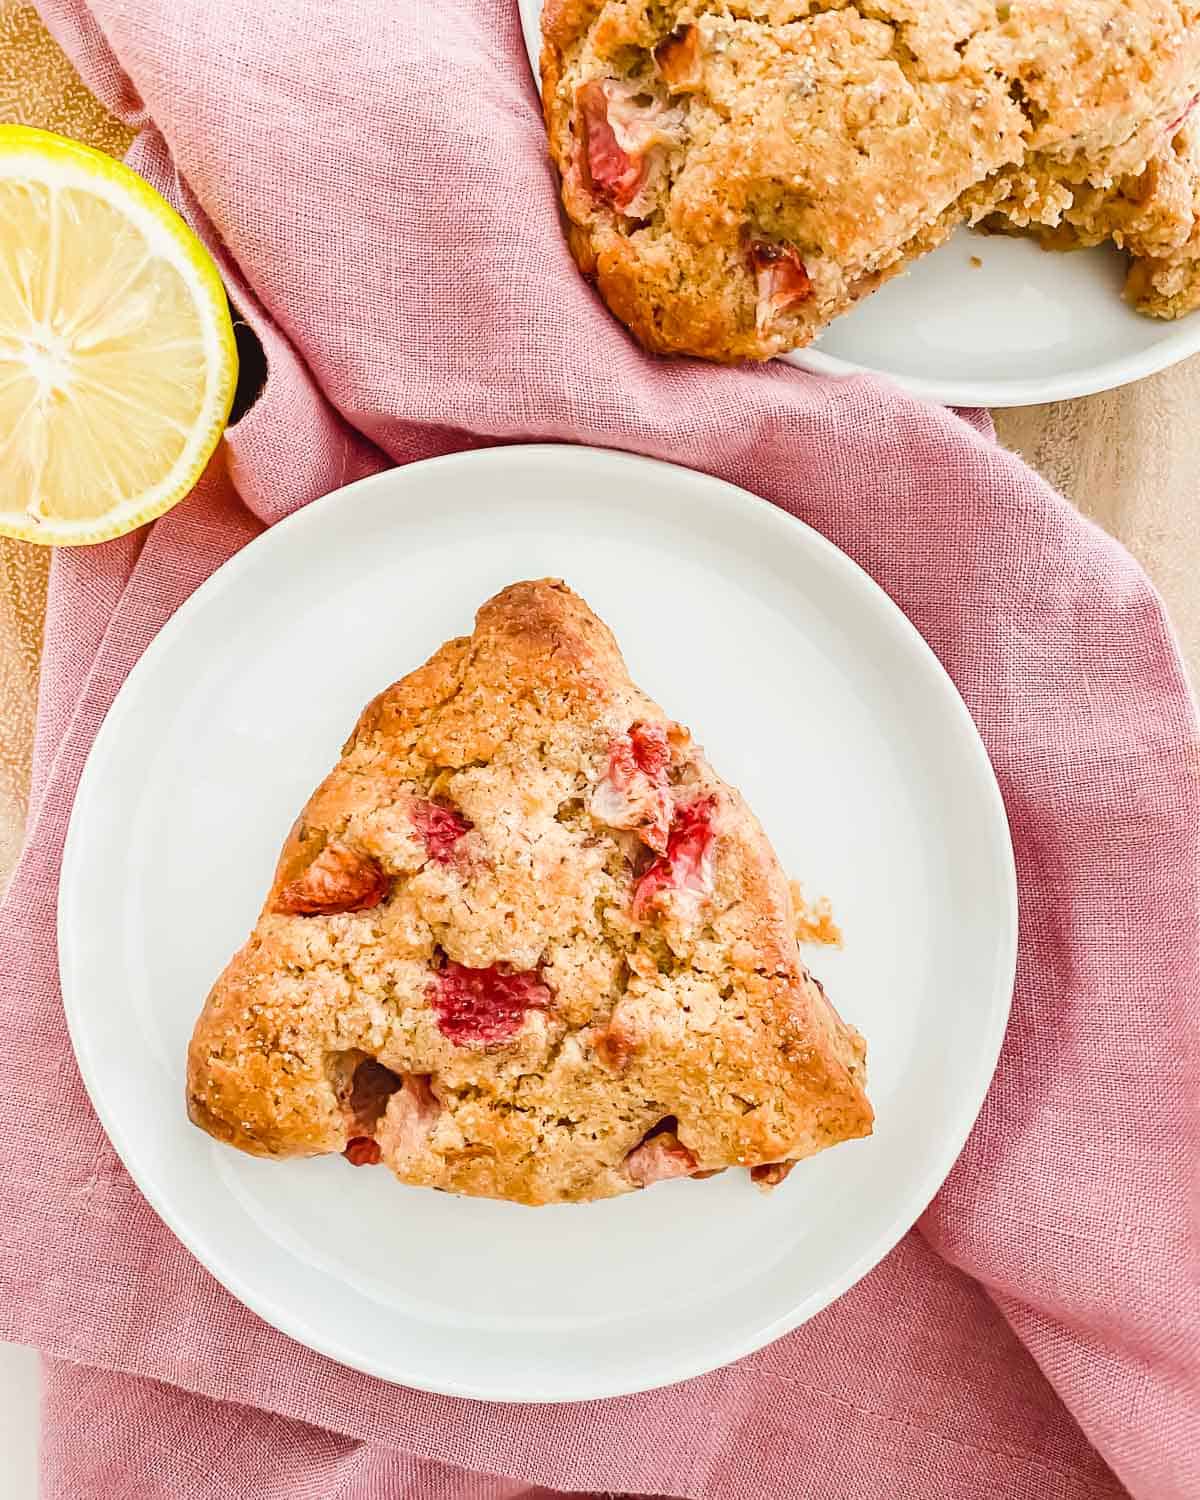 Gluten-free, vegan, grain-free strawberry lemon scones. Loaded with bright spring flavors with a tender, flaky crumb.